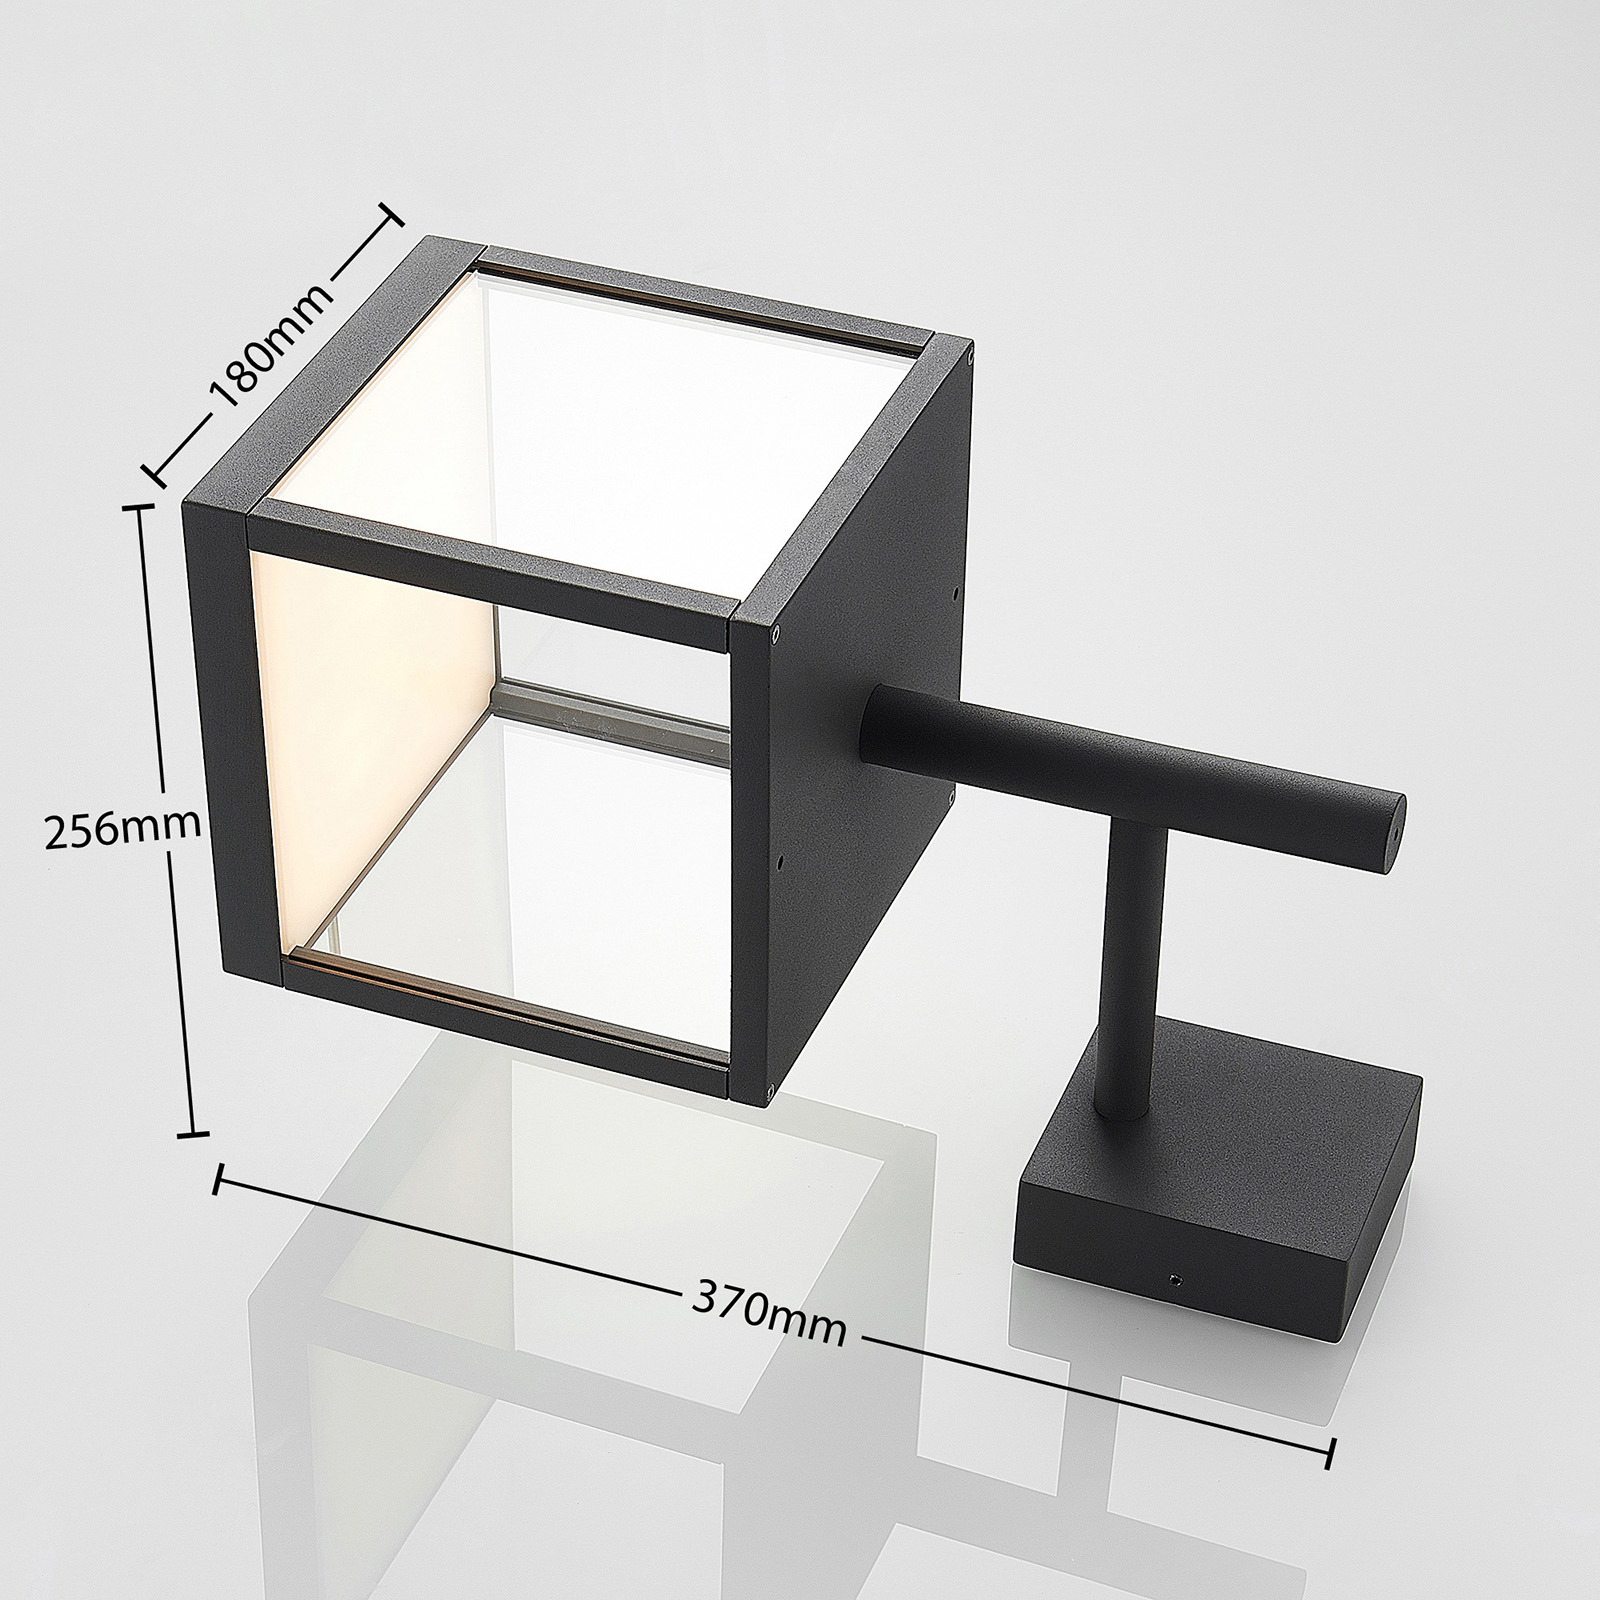 LED outdoor wall light Cube, glass lampshade